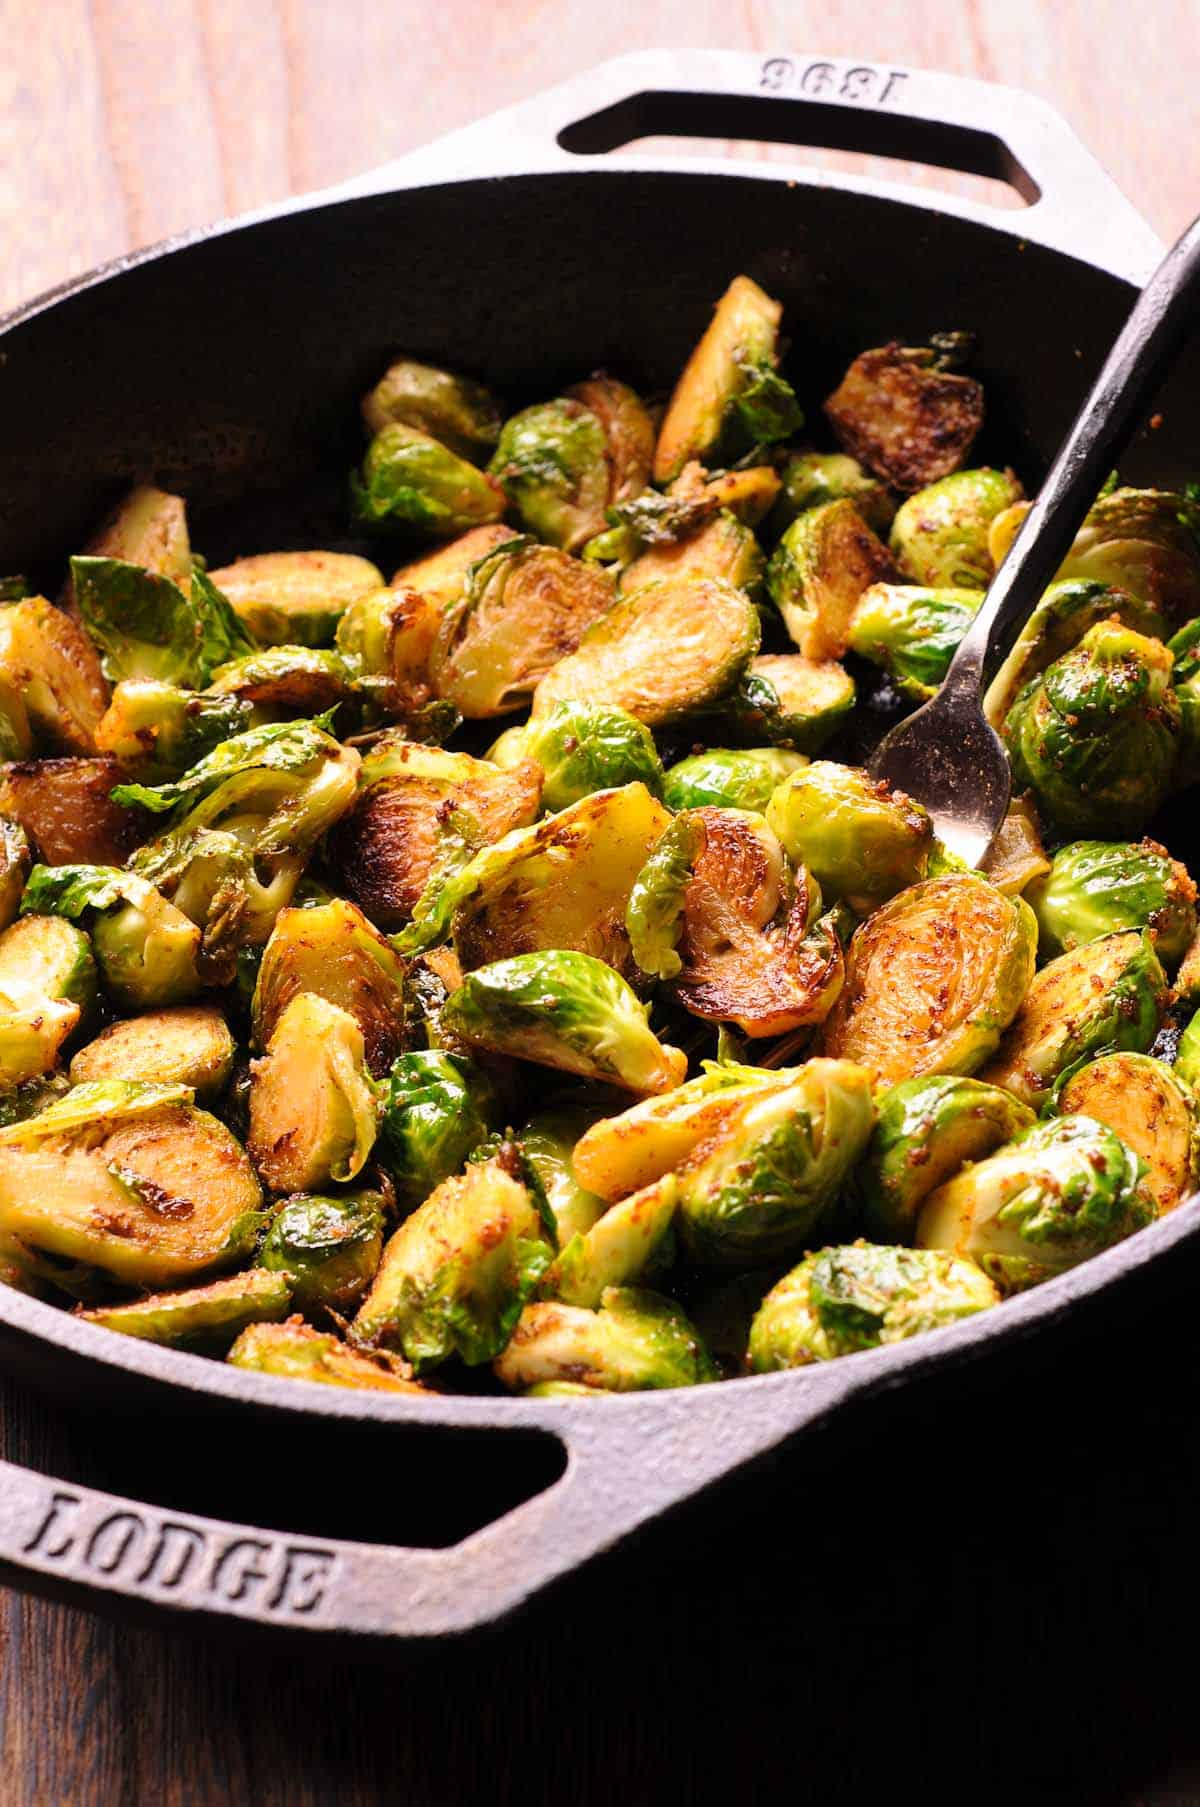 Brussels Sprouts cooked in a skillet